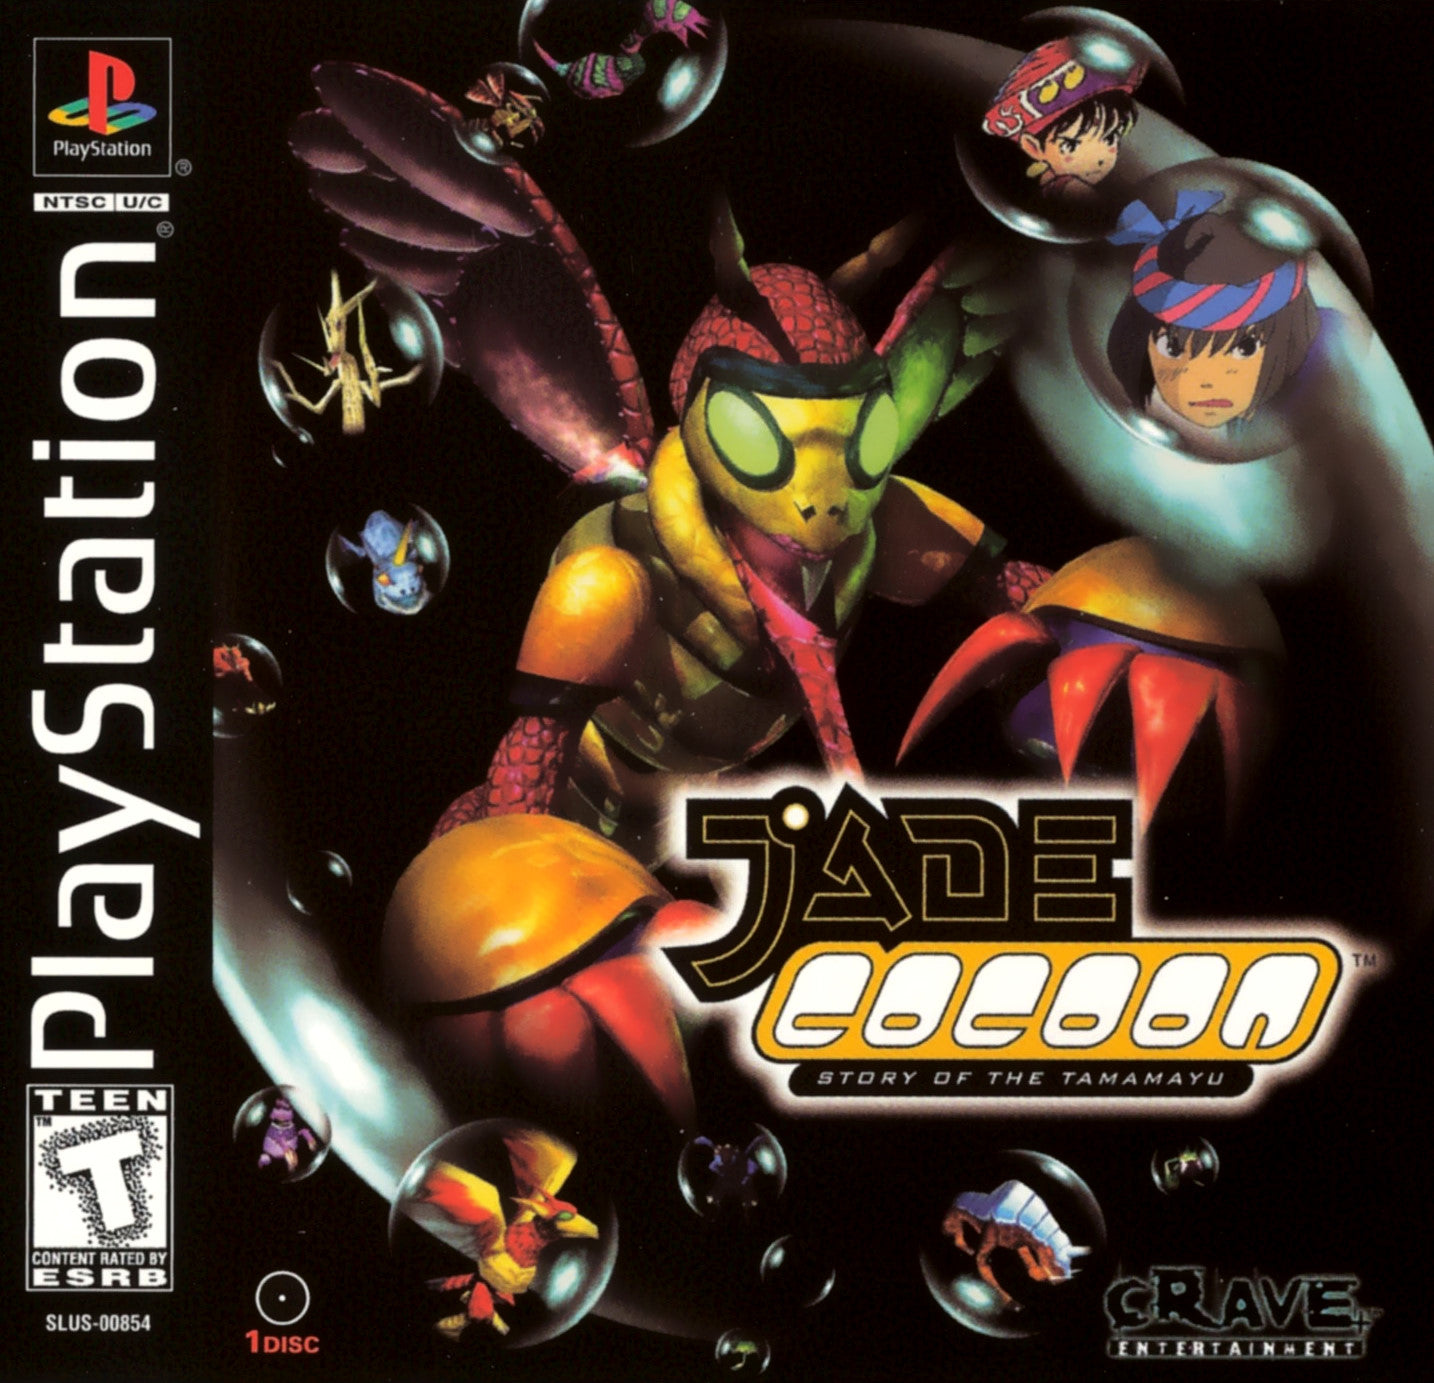 Jade Cocoon: Story of the Tamamayu - PlayStation 1 (PS1) Game